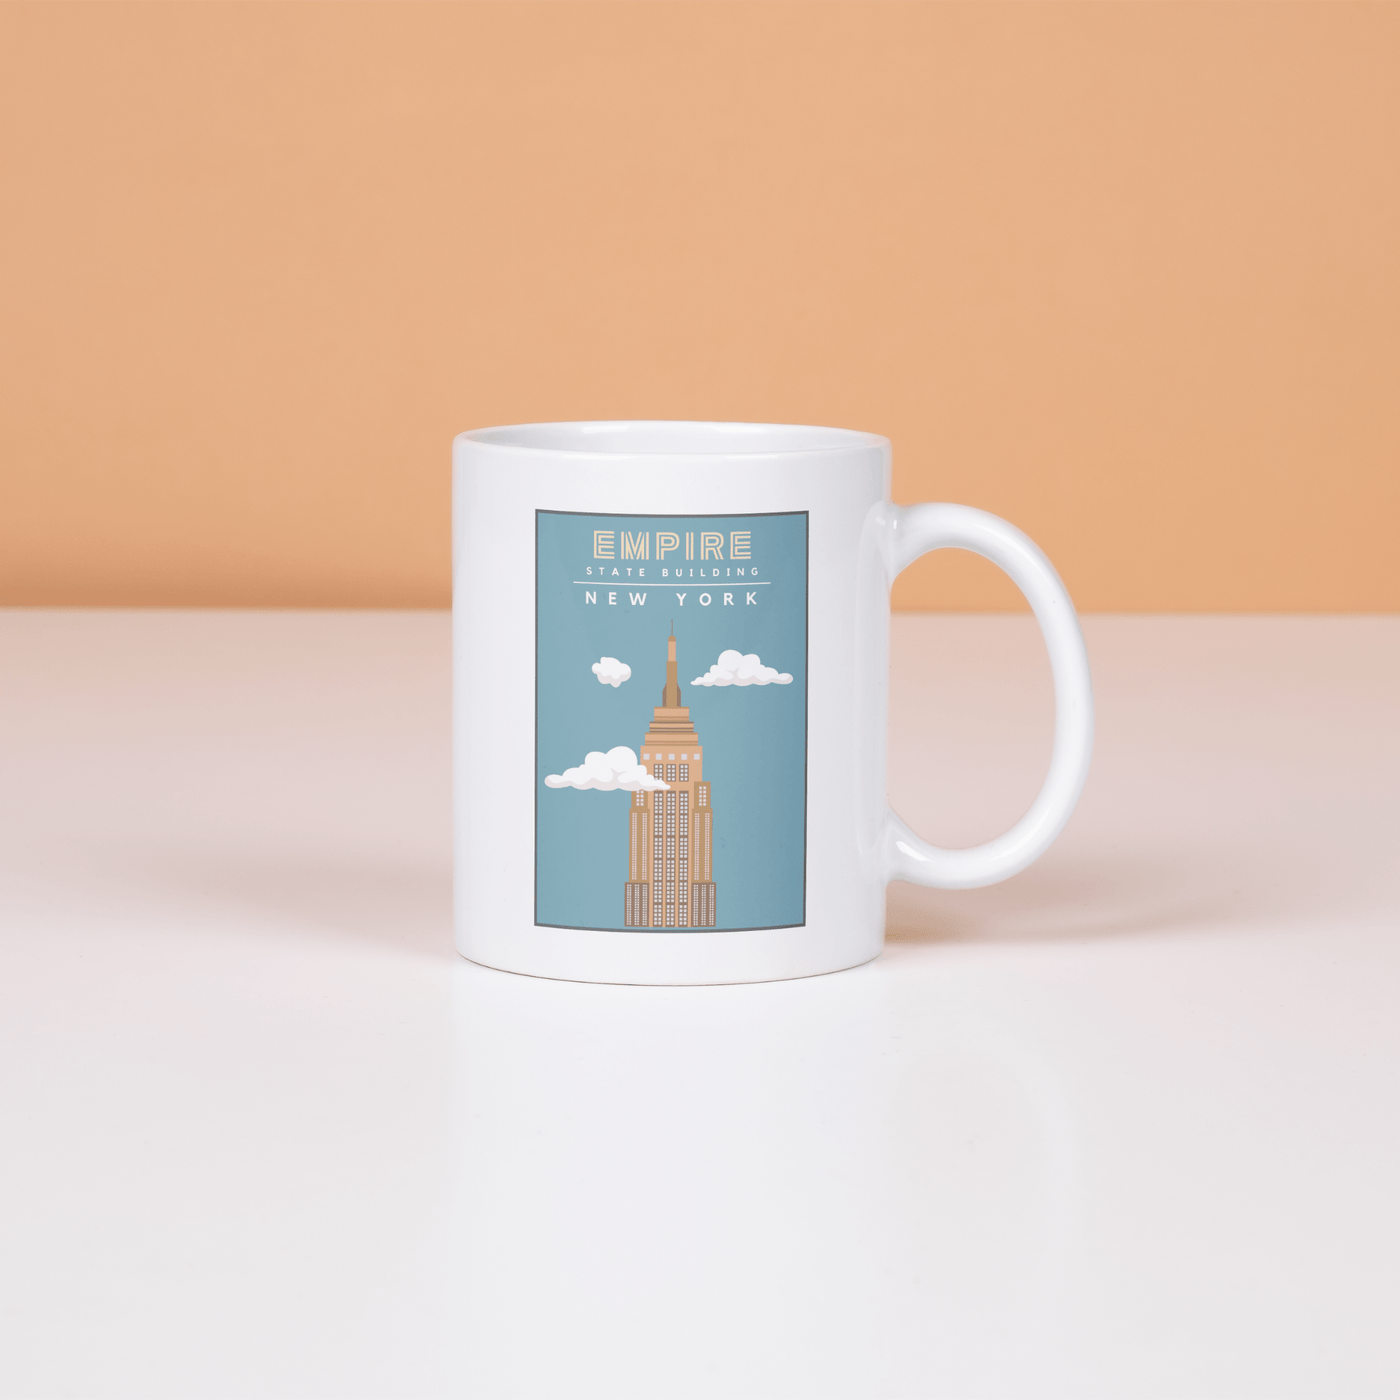 new york mug featuring the Empire state building